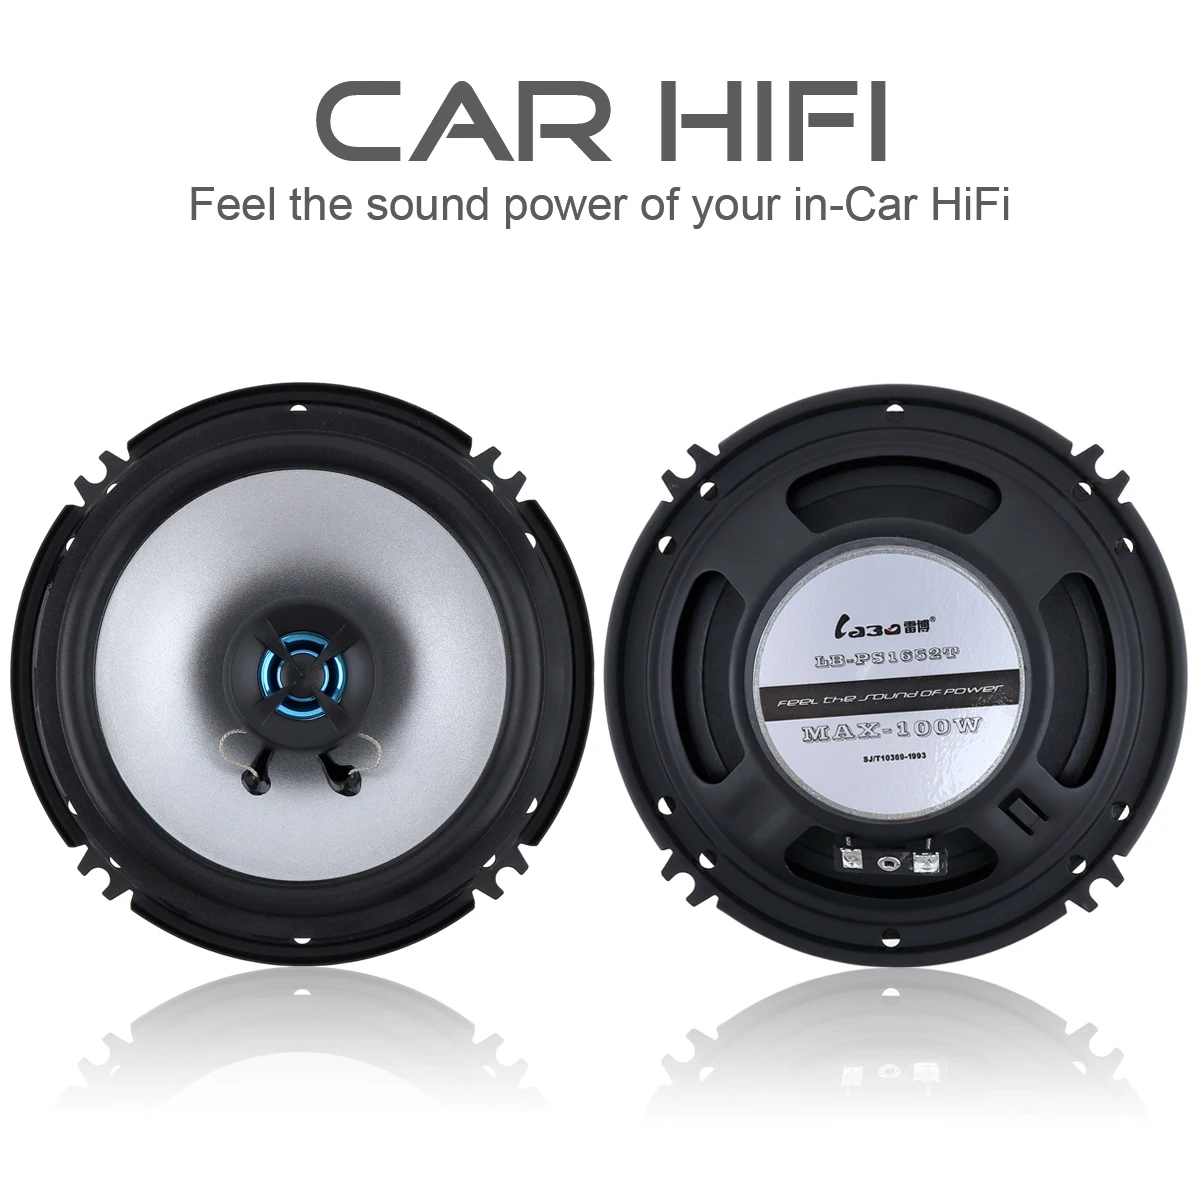 2pcs LB-PS1652T 100W 2 Way Car Coaxial Vehicle Door Auto Audio Music Stereo Full Range Frequency Hifi Speakers 5 inch ts a1372e car hifi coaxial speaker vehicle door auto audio music stereo full range frequency speakers for cars